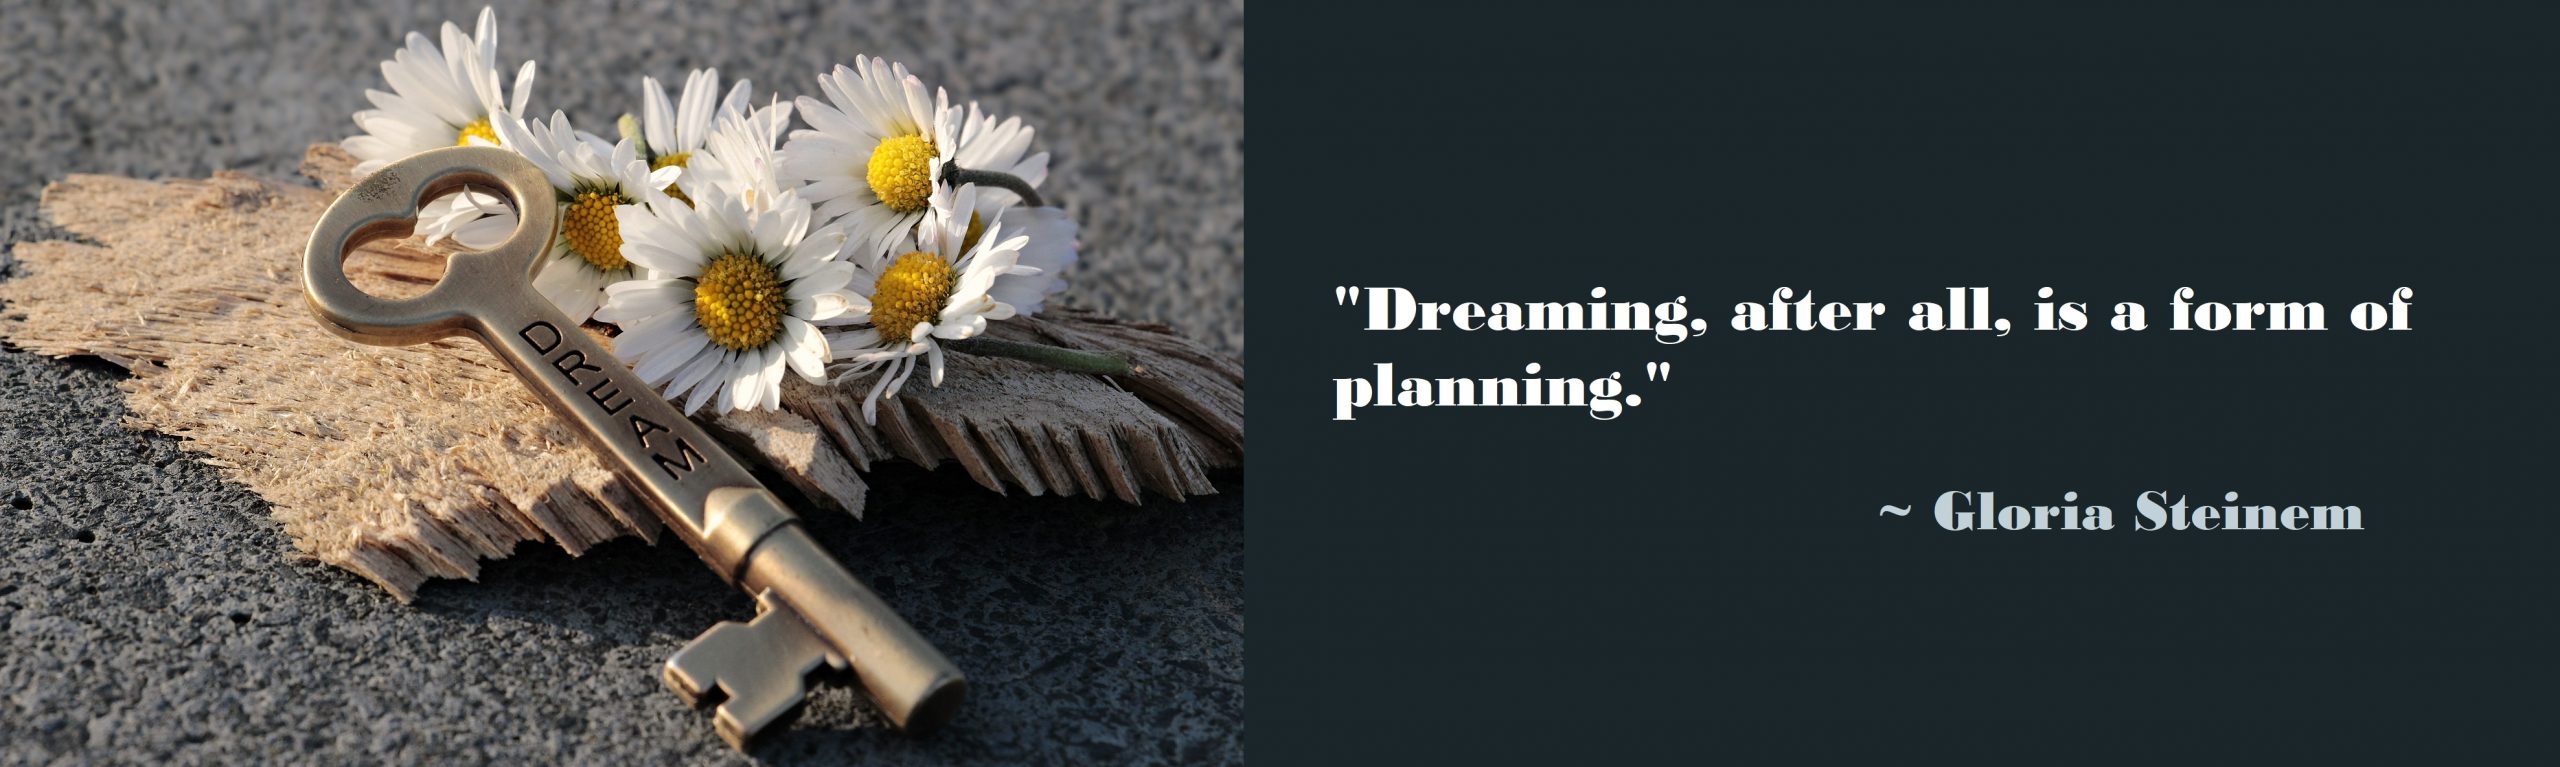 Dreaming, after all, is a form of planning. Gloria Steinem